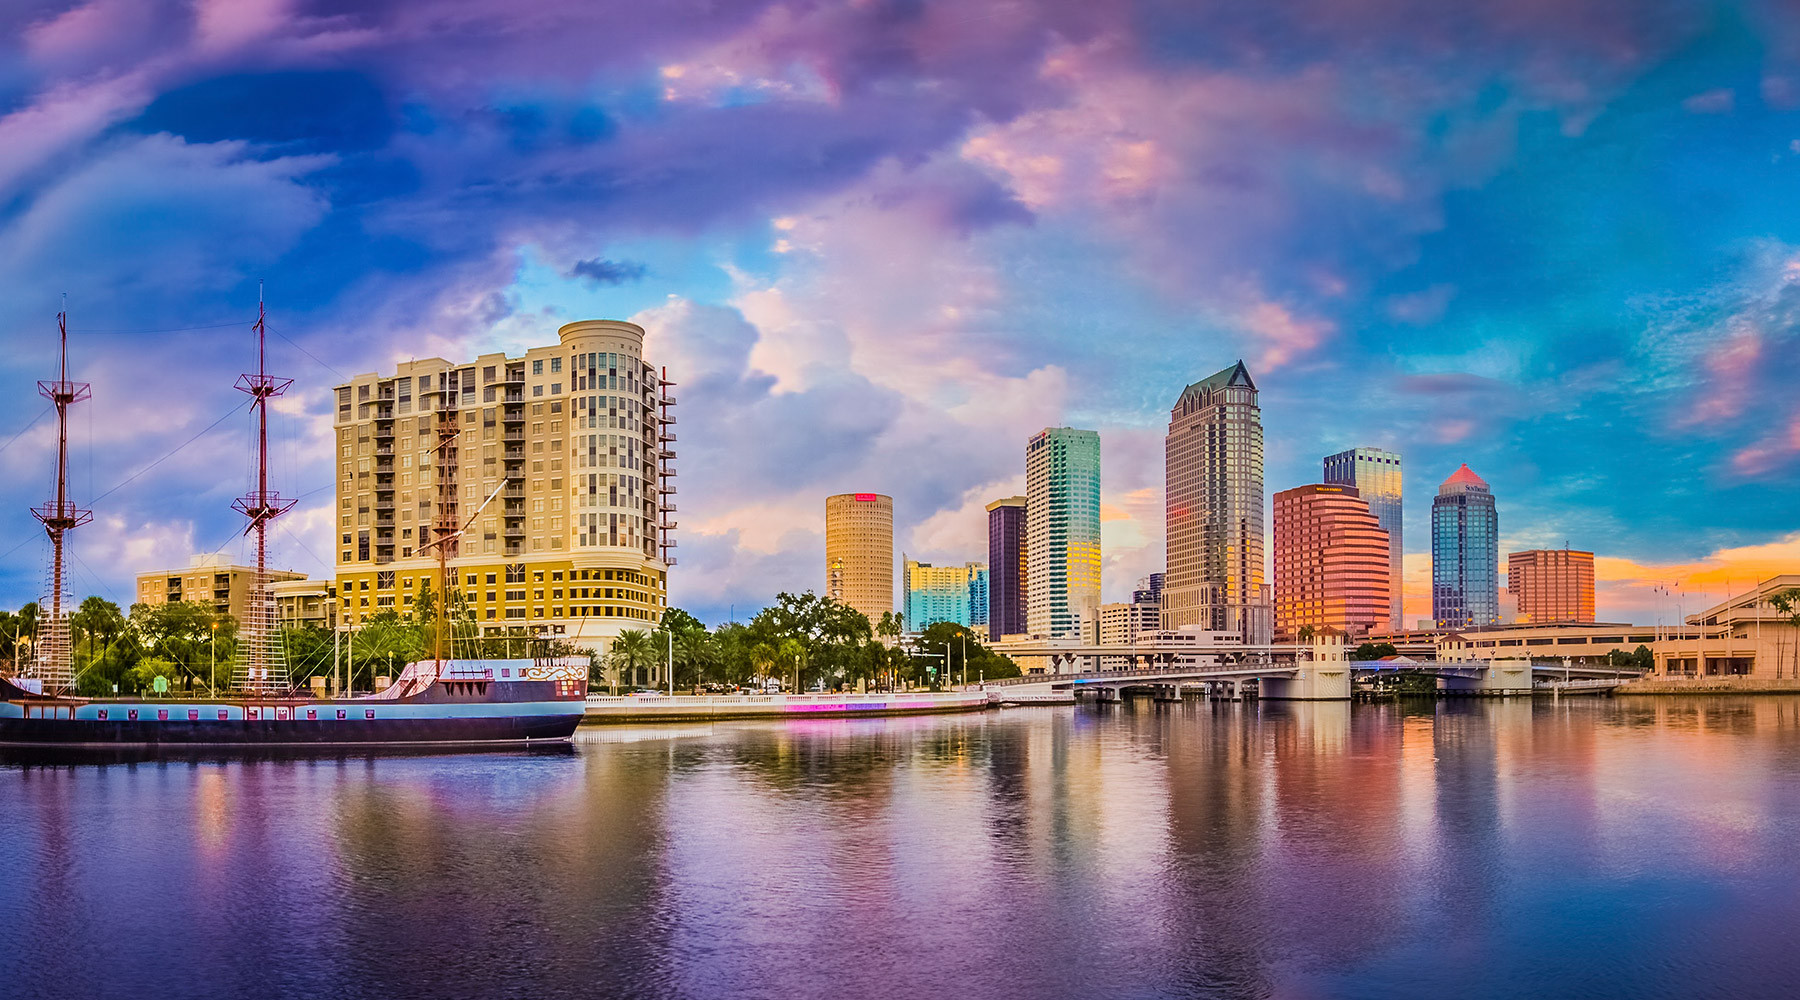 A view of Tampa